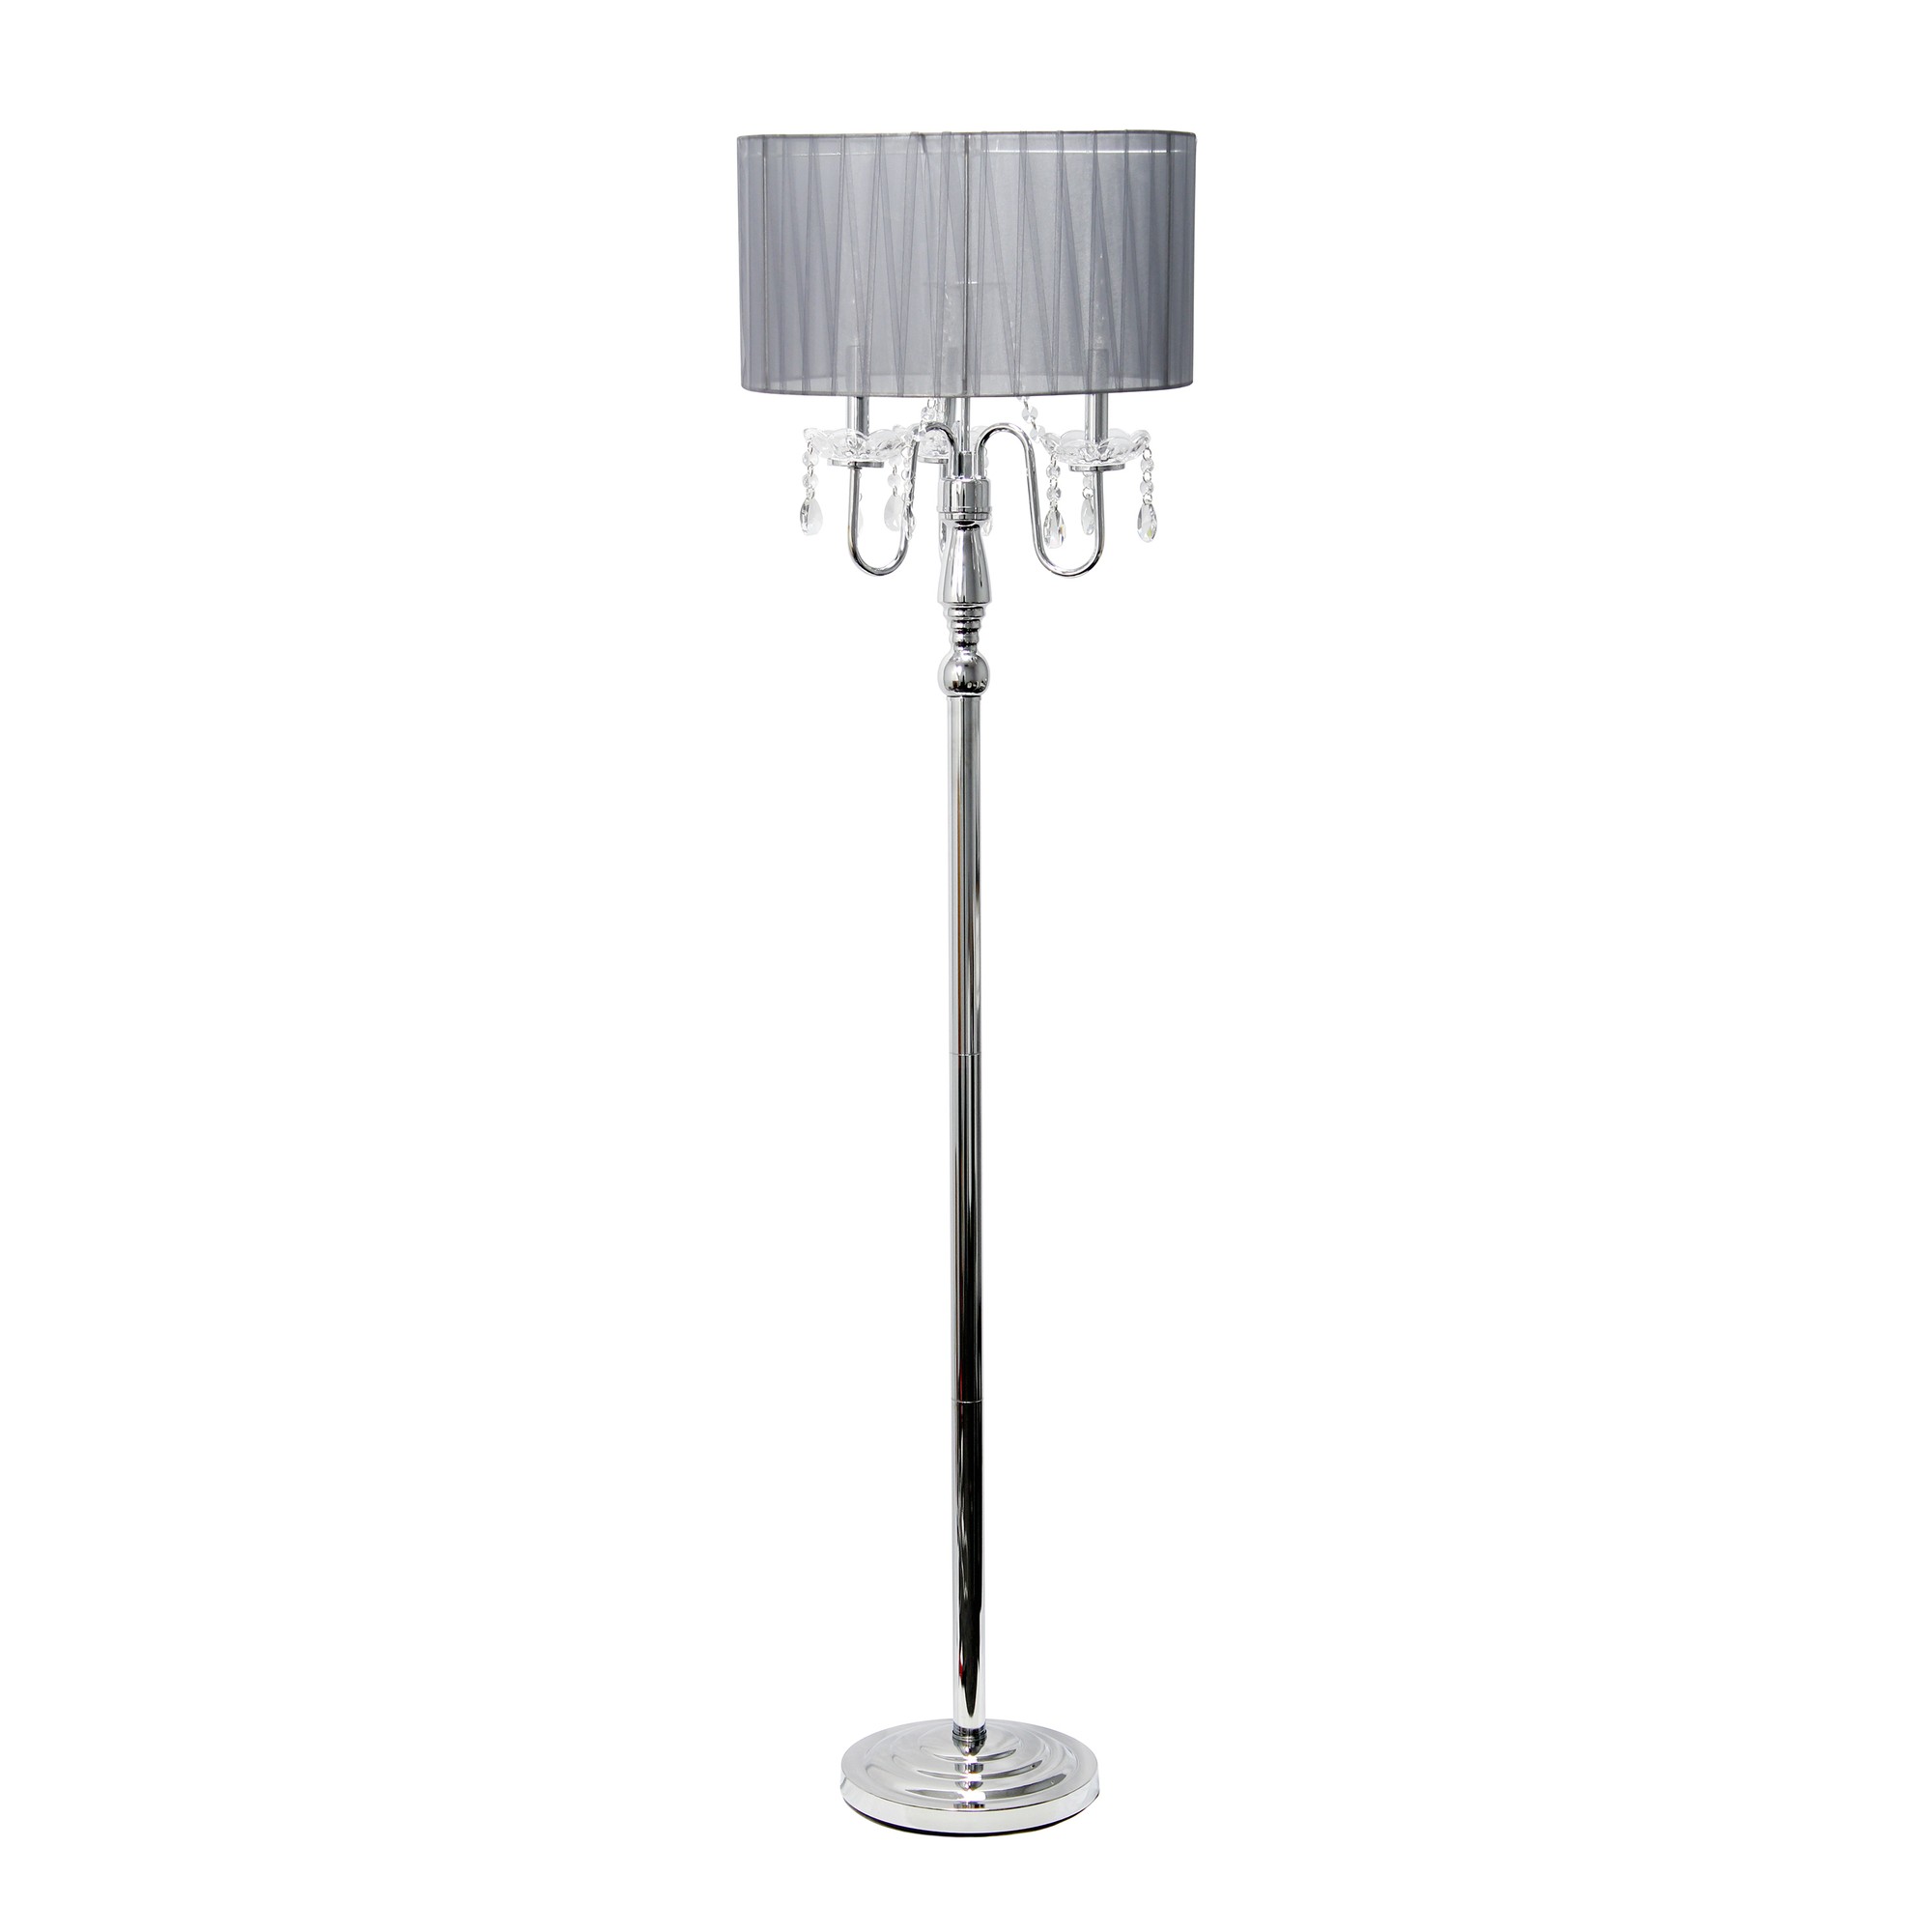 Elegant Designs RomanticCascading Crystal and Chrome Floor Lamp with Drum Shade, Gray